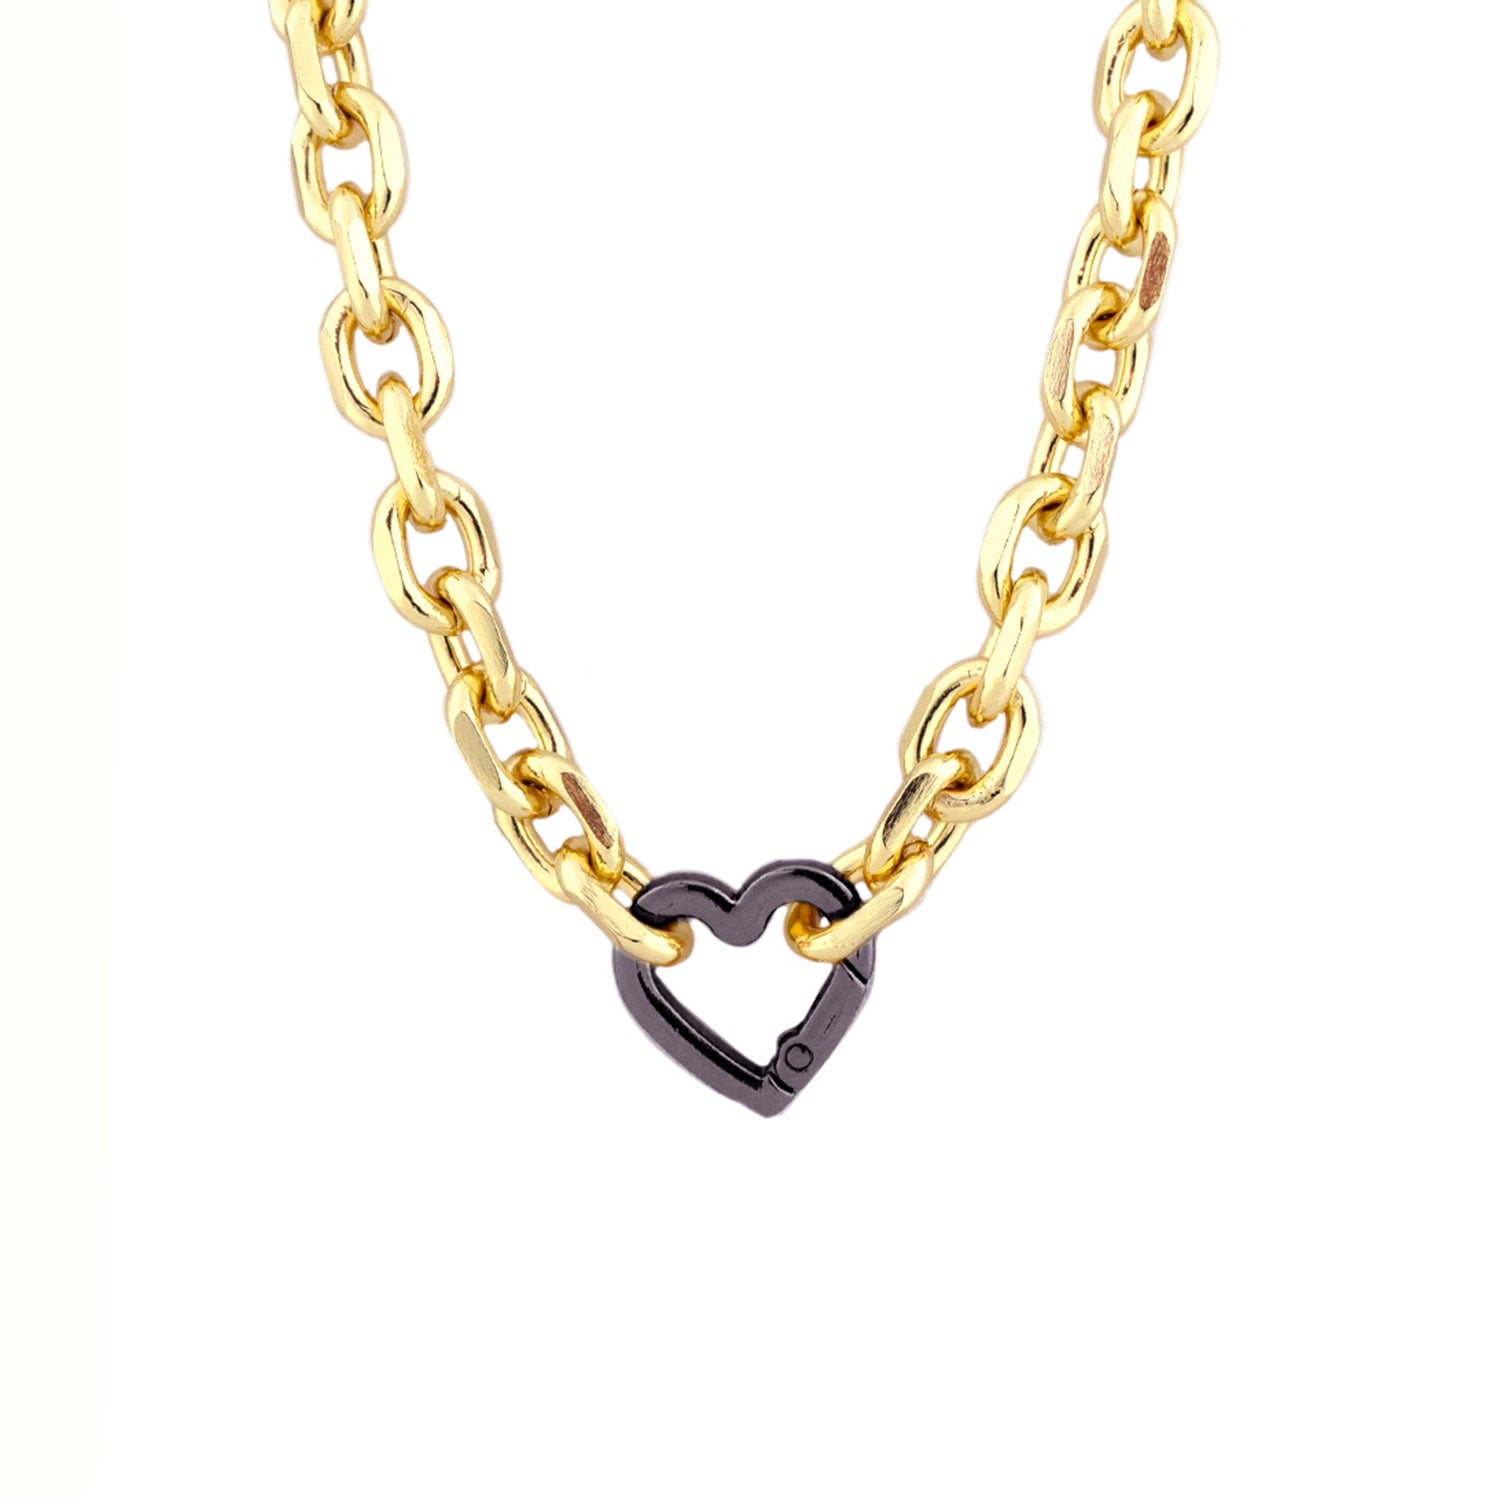 chain link heart clasp necklace